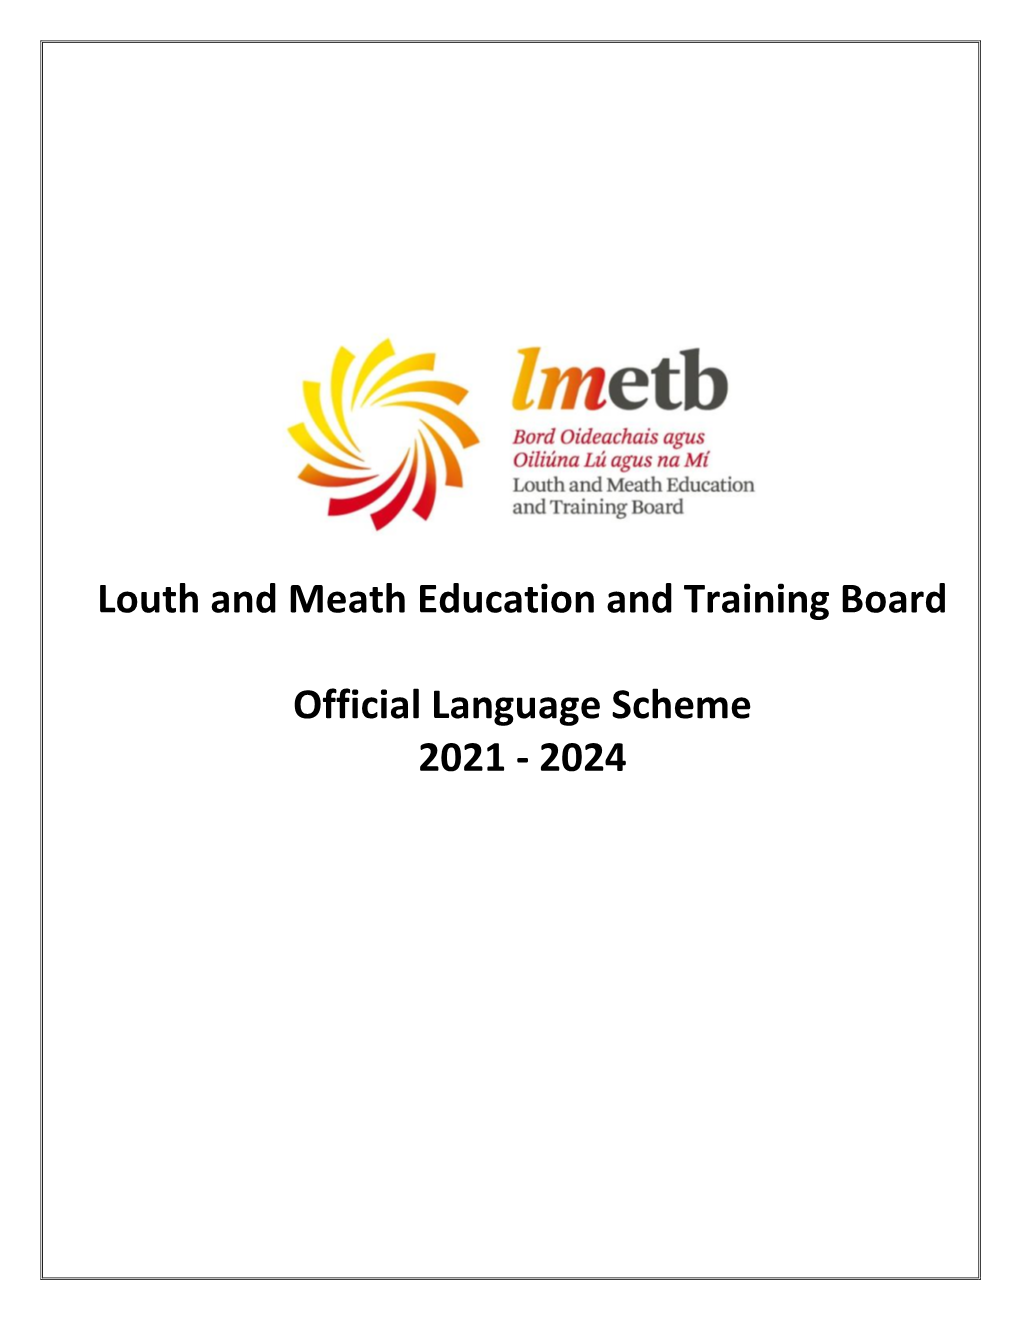 Louth and Meath Education and Training Board